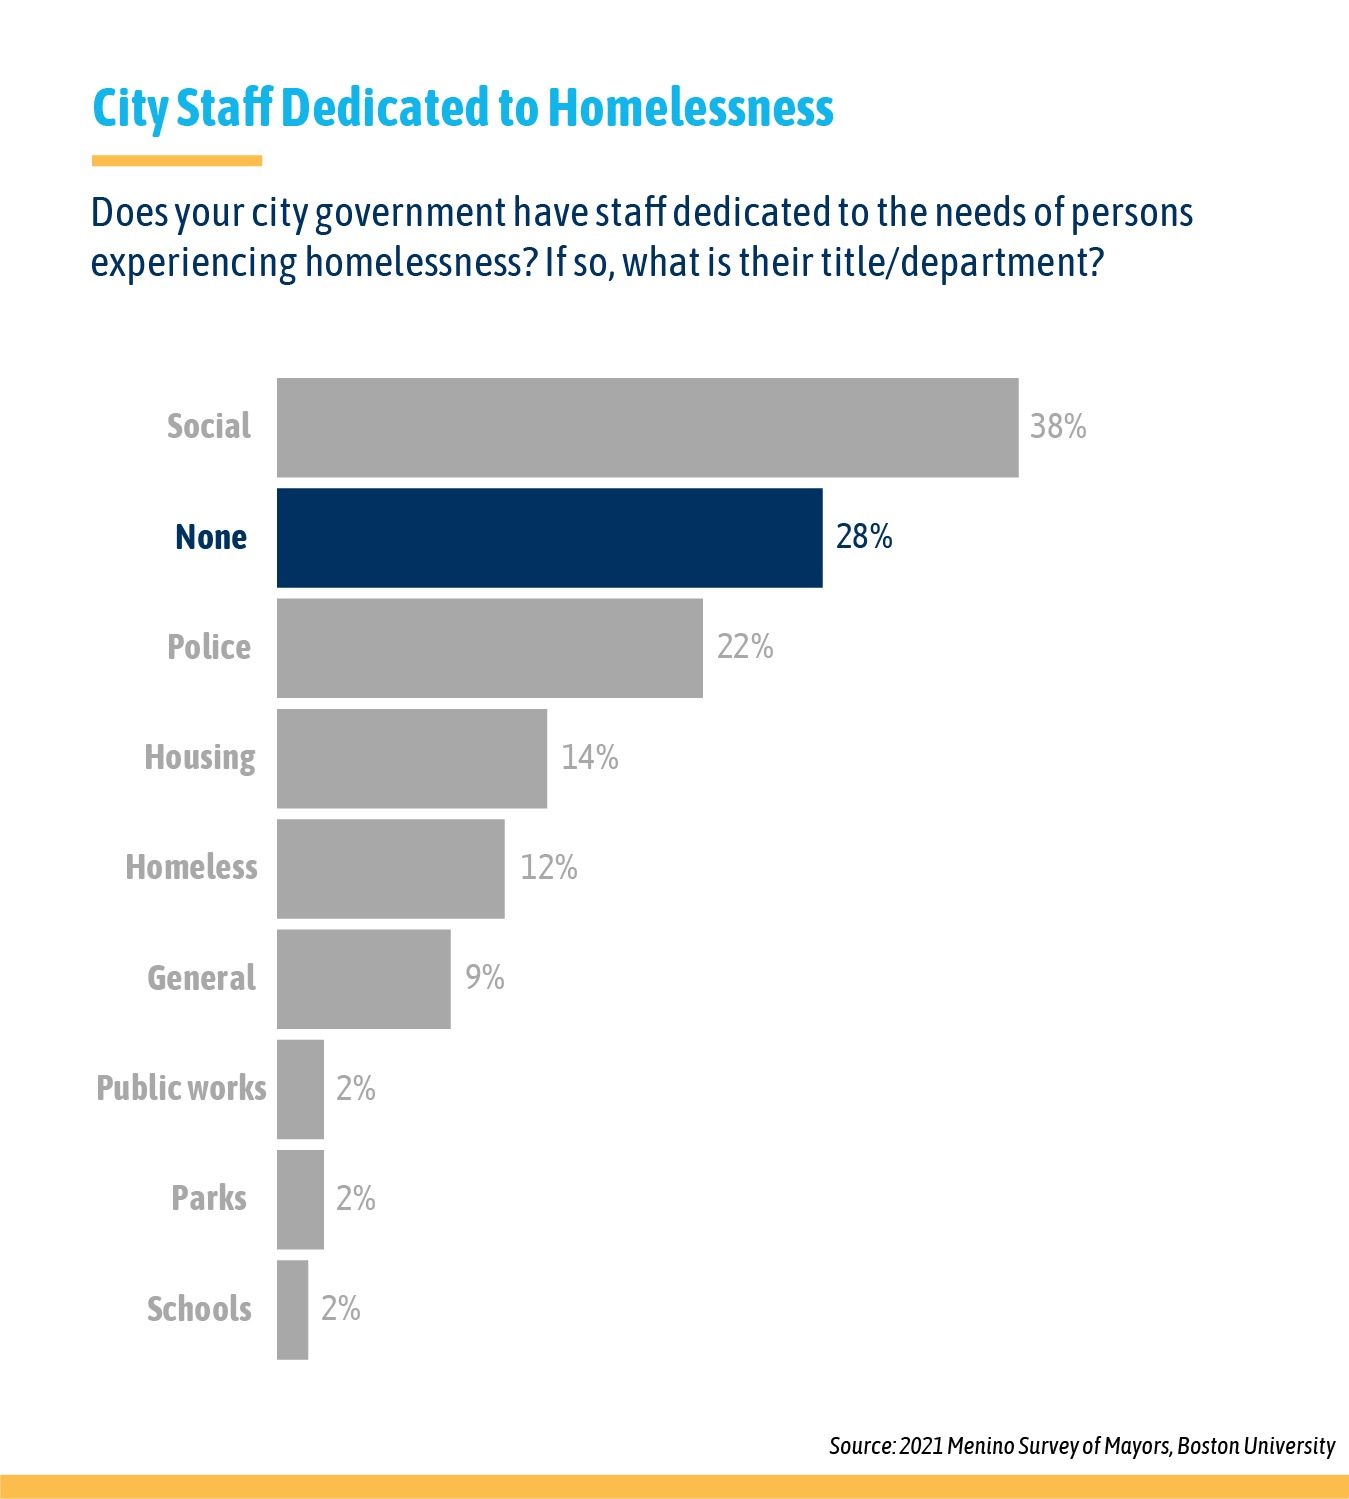 Almost one-third of cities (28%) have no staff exclusively dedicated to serving people experiencing homelessness.